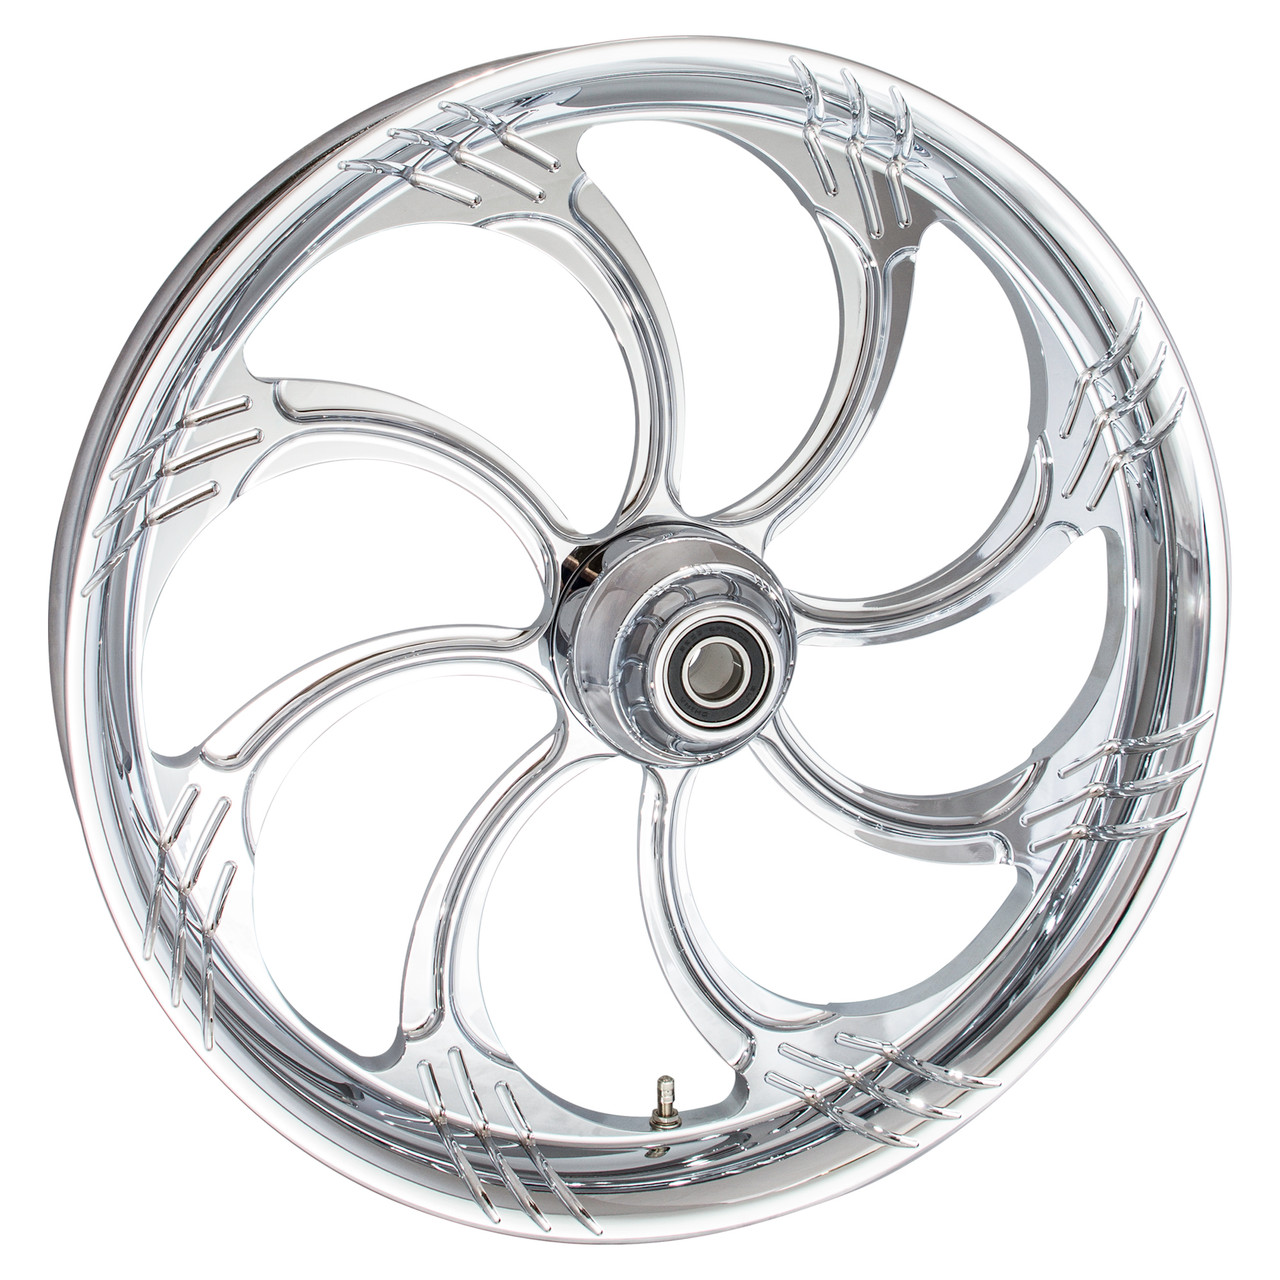 Indian Chieftain Motorcycle Wheels